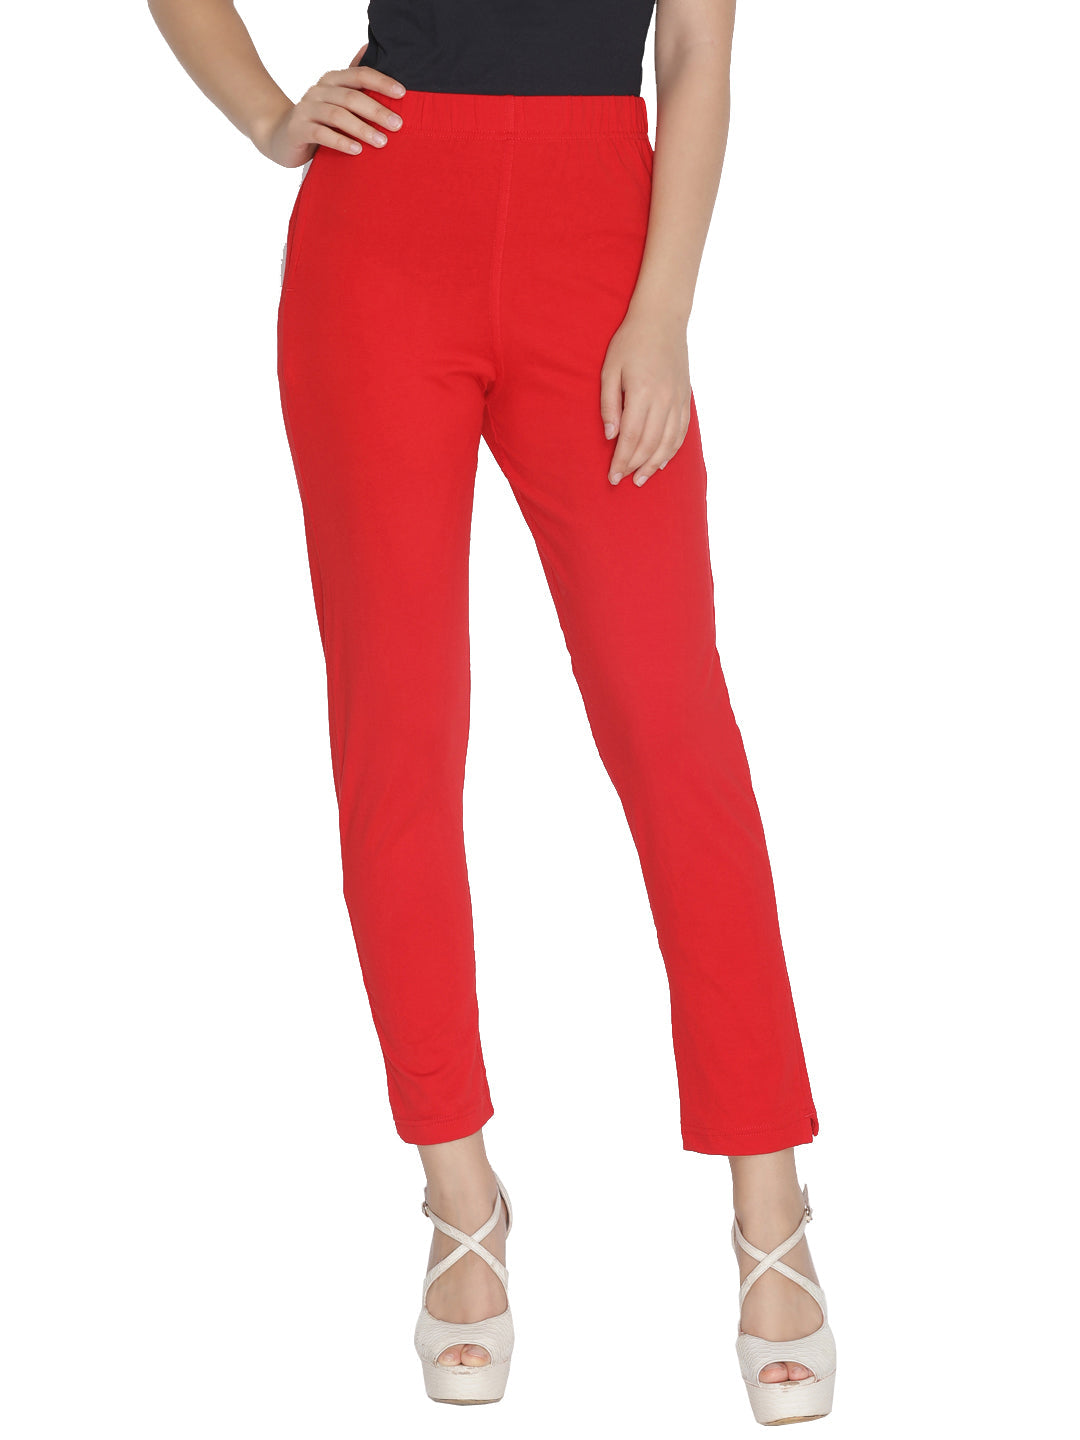 Black and Red Kutri Pant Combo Pack